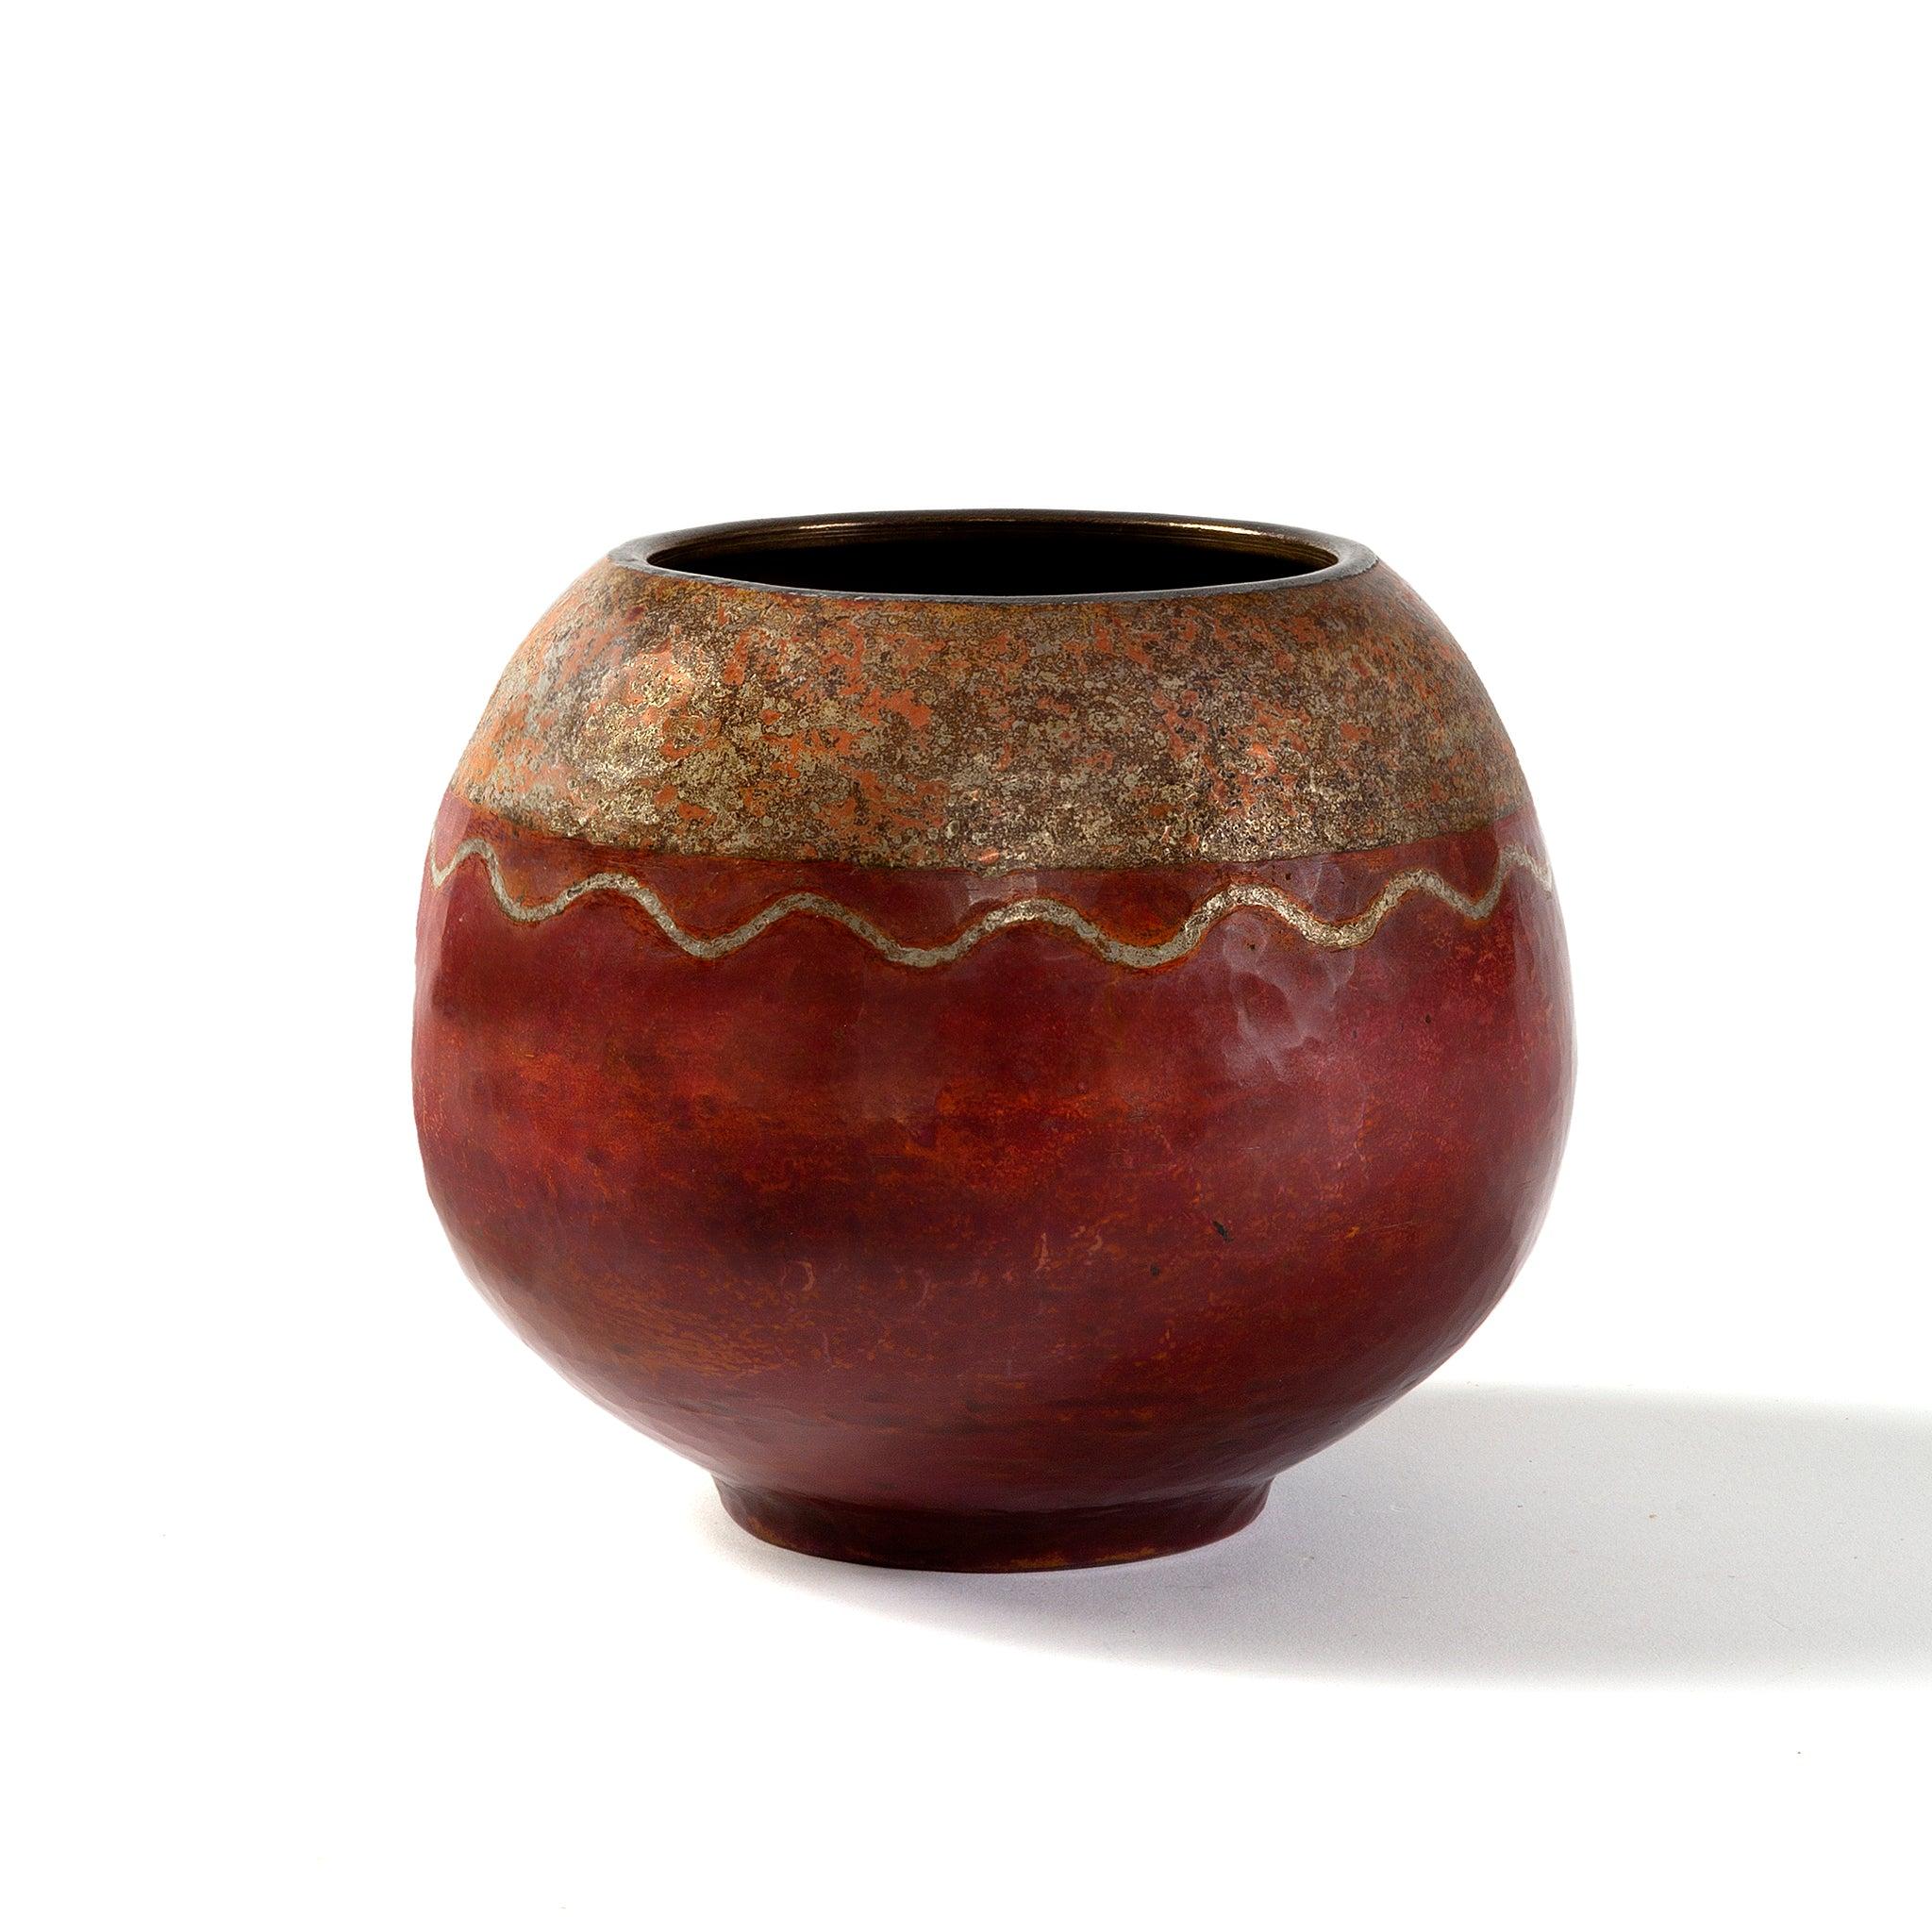 This rare French Art Deco vase, by Claudius Linossier was created using the complex technique known as dinanderie, which involved decorating hand-raised copper vessels to produce subtle but beautiful gradations of color. This spherical vase with an